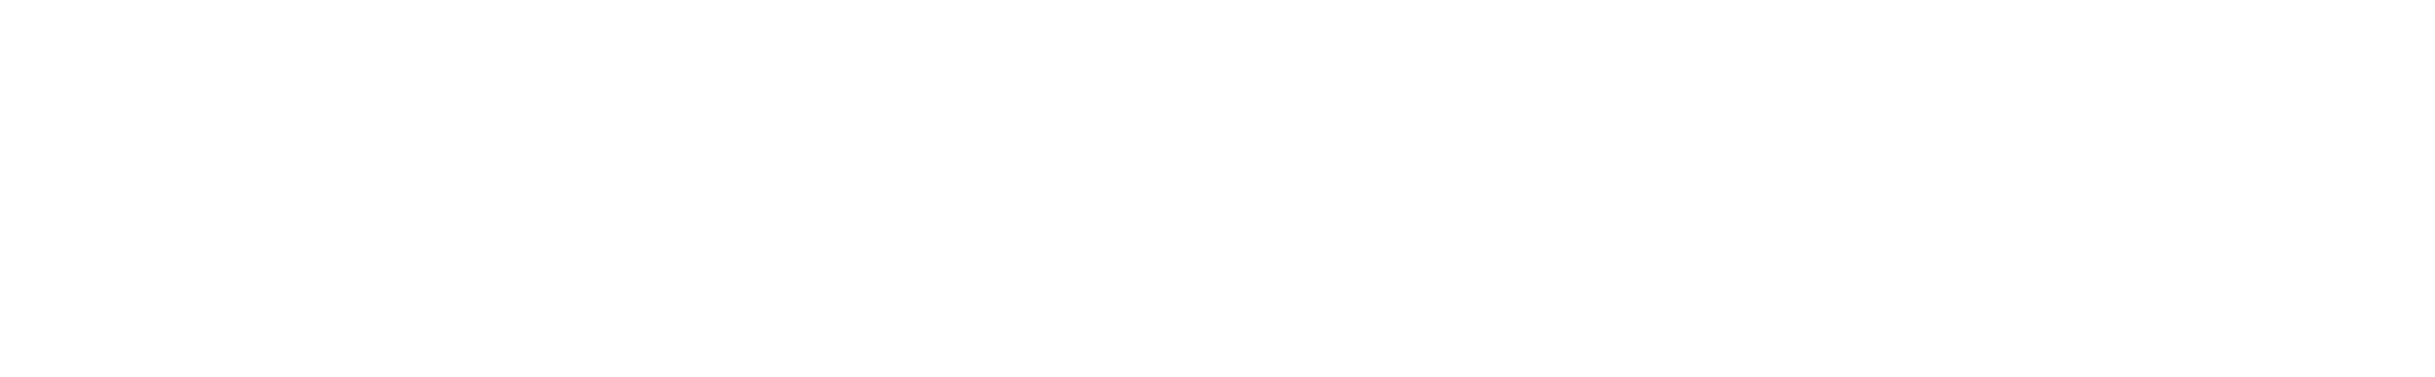 Intuity Medical, Inc. Footer Logo